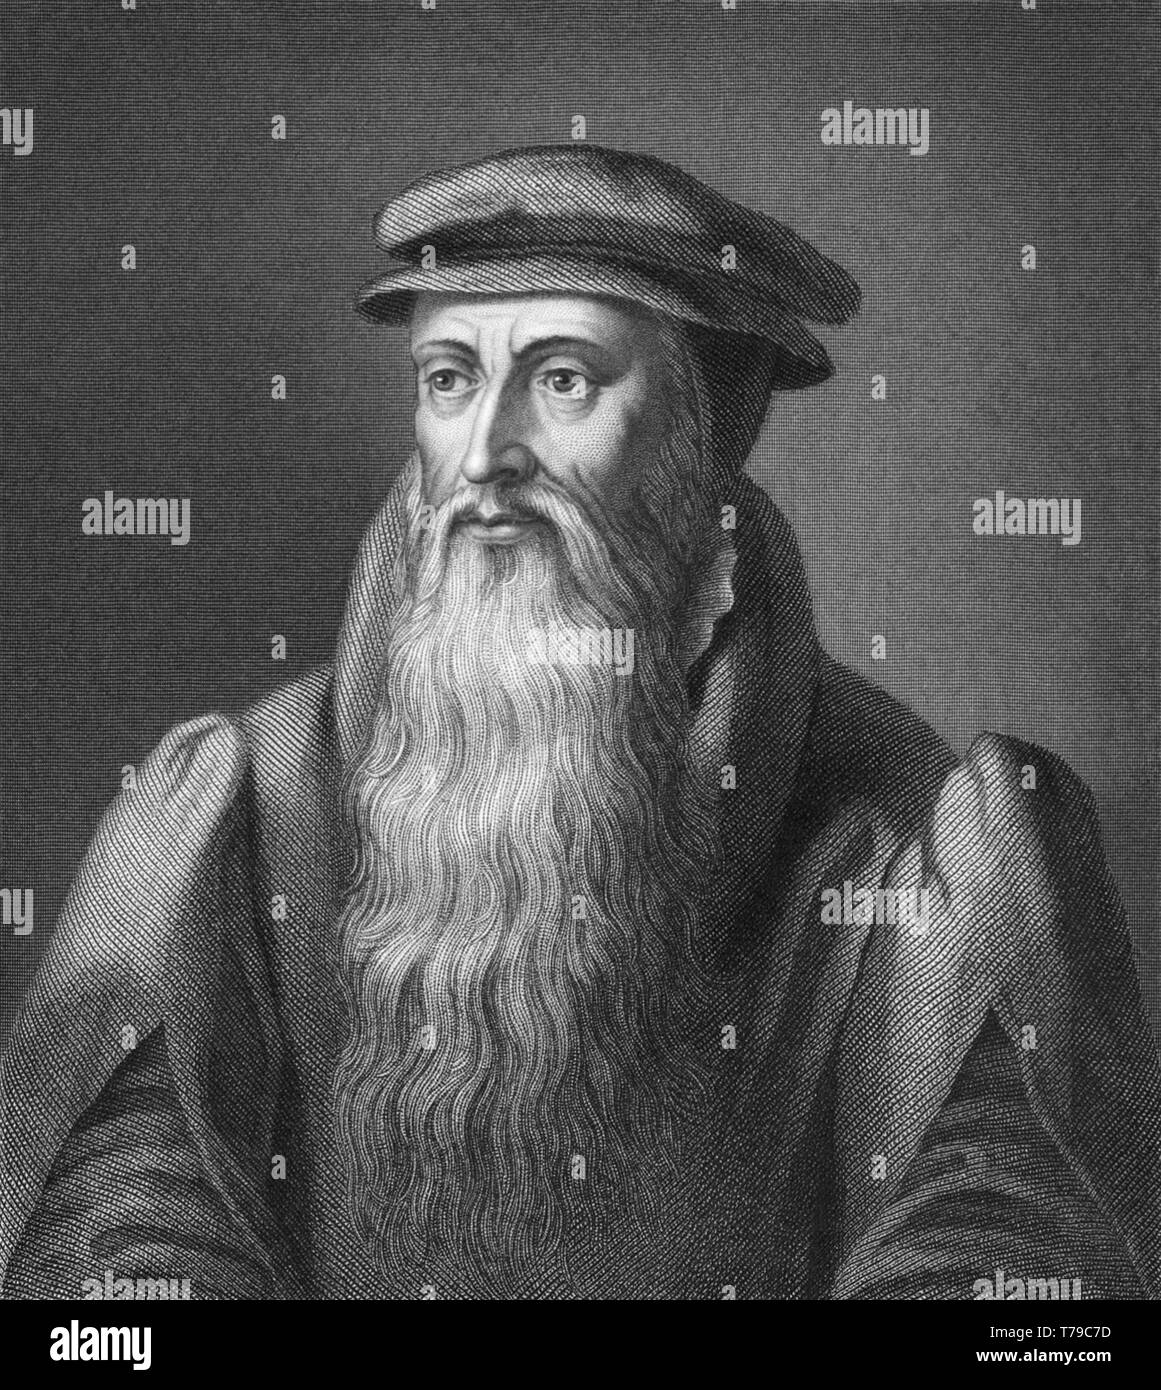 John Knox (c1513–1572) was a Scottish minister, theologian, and writer who was a leader of the Reformation in Scotland and was the founder of the Presbyterian Church of Scotland. Stock Photo